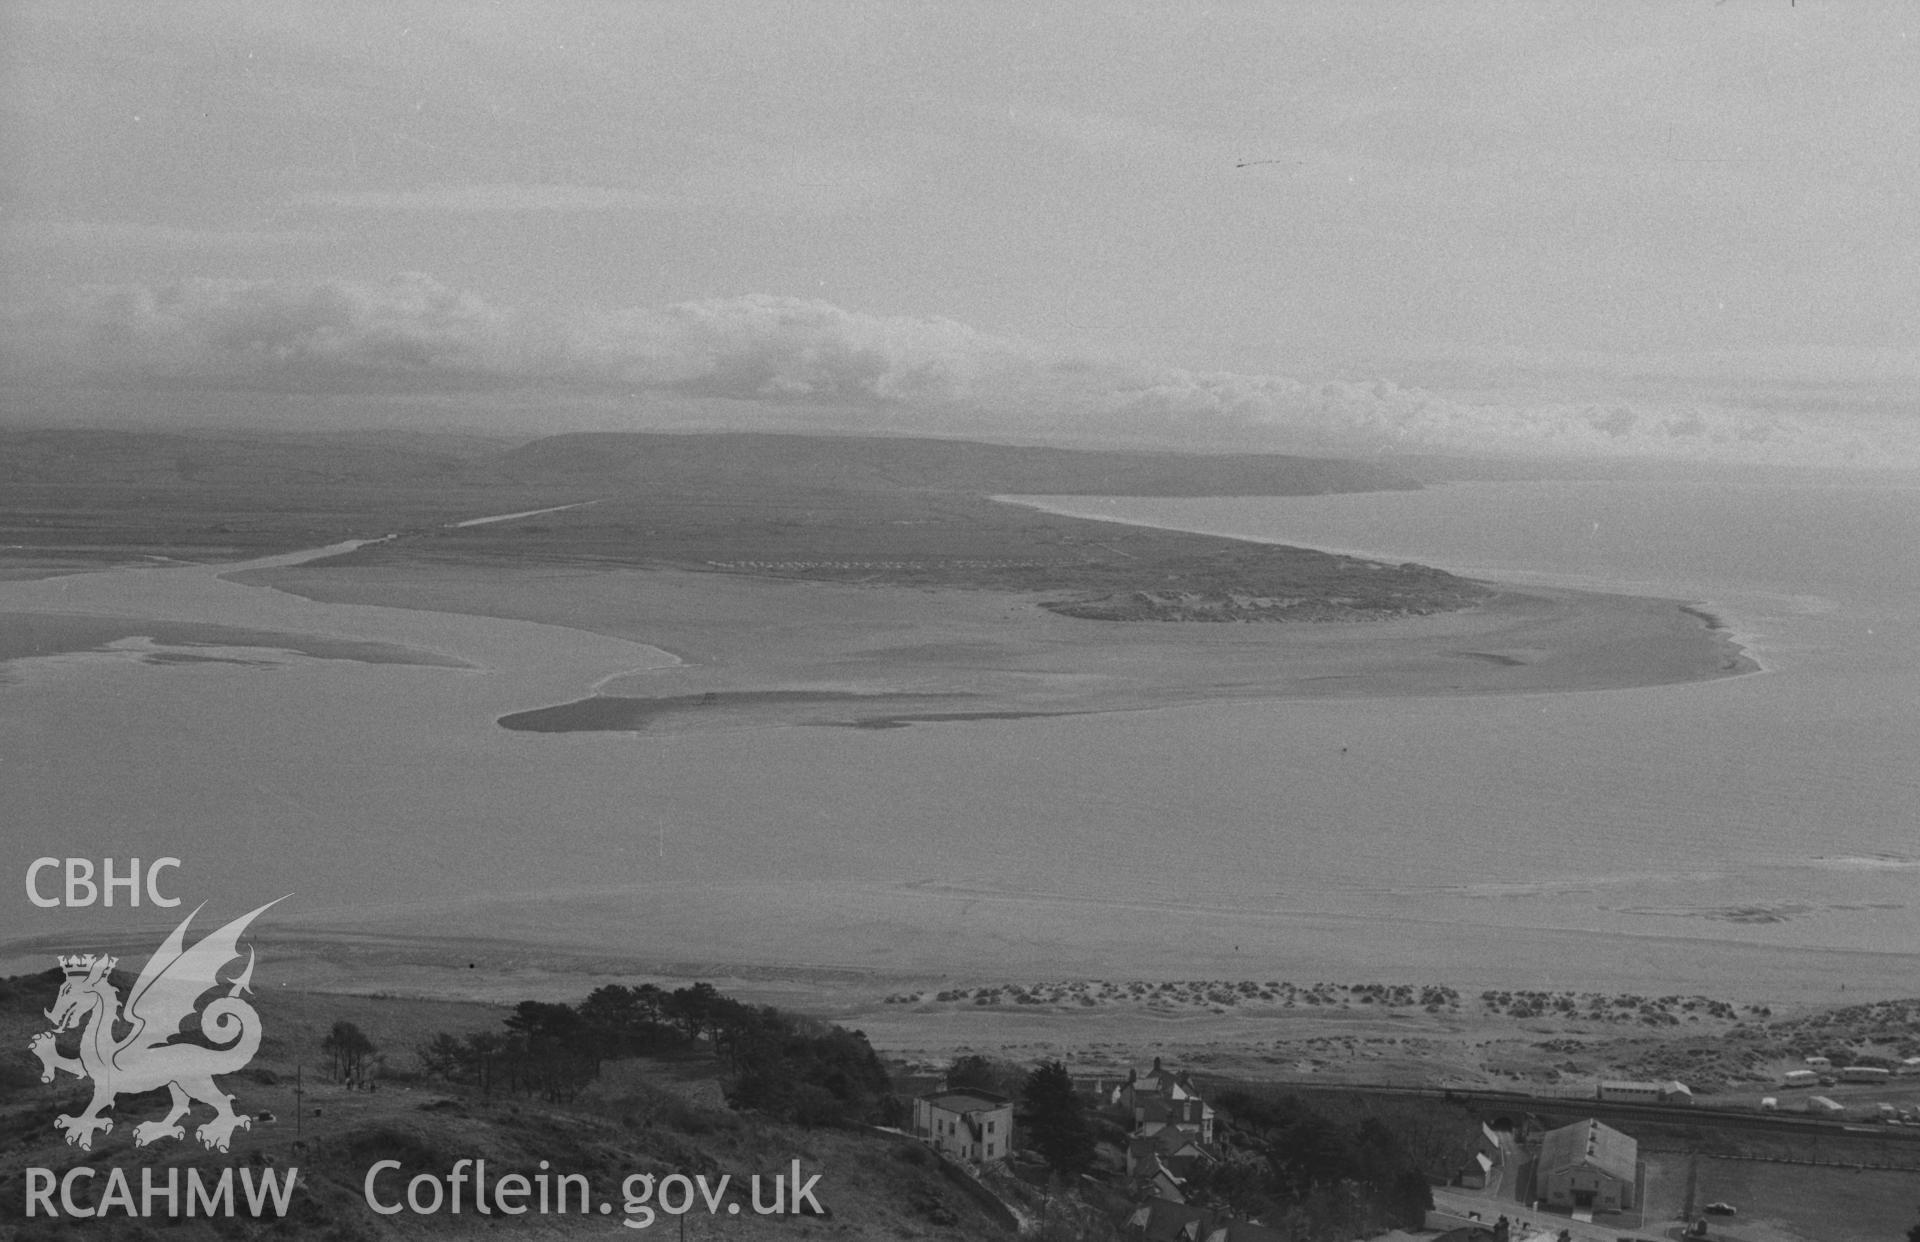 Digital copy of a black and white negative showing view across Dyfi estuary from above Aberdovey. Photographed in April 1964 by Arthur O. Chater from Grid Reference SN 611 964, looking east - south south west.